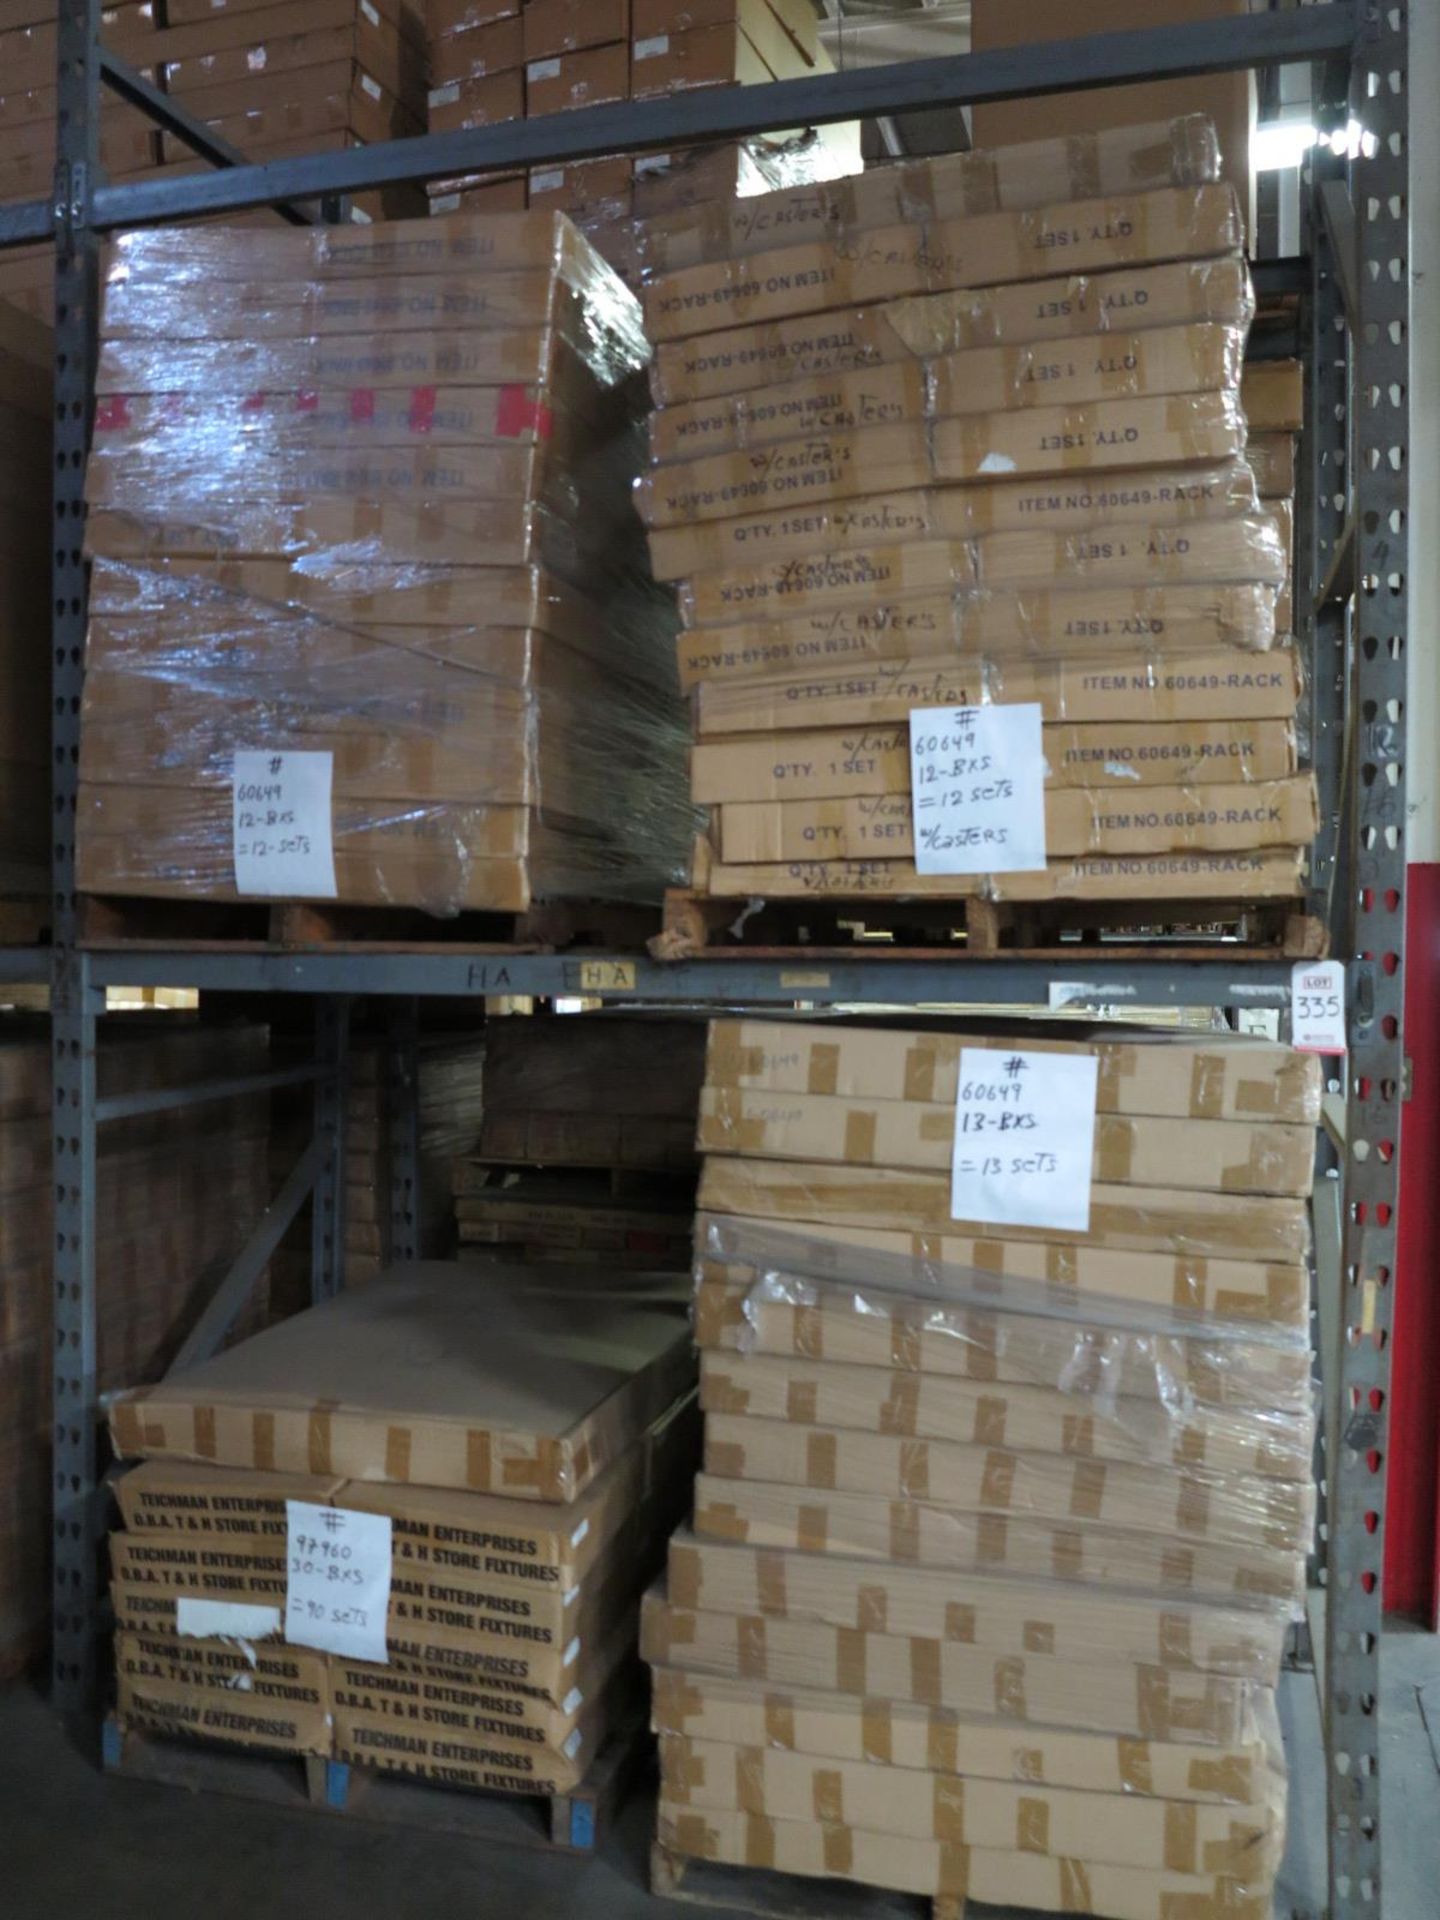 LOT - CONTENTS OF (2) SECTIONS OF PALLET RACK TO INCLUDE: ITEM # 26164, ADD ON ARM F MINI QUAD (S/